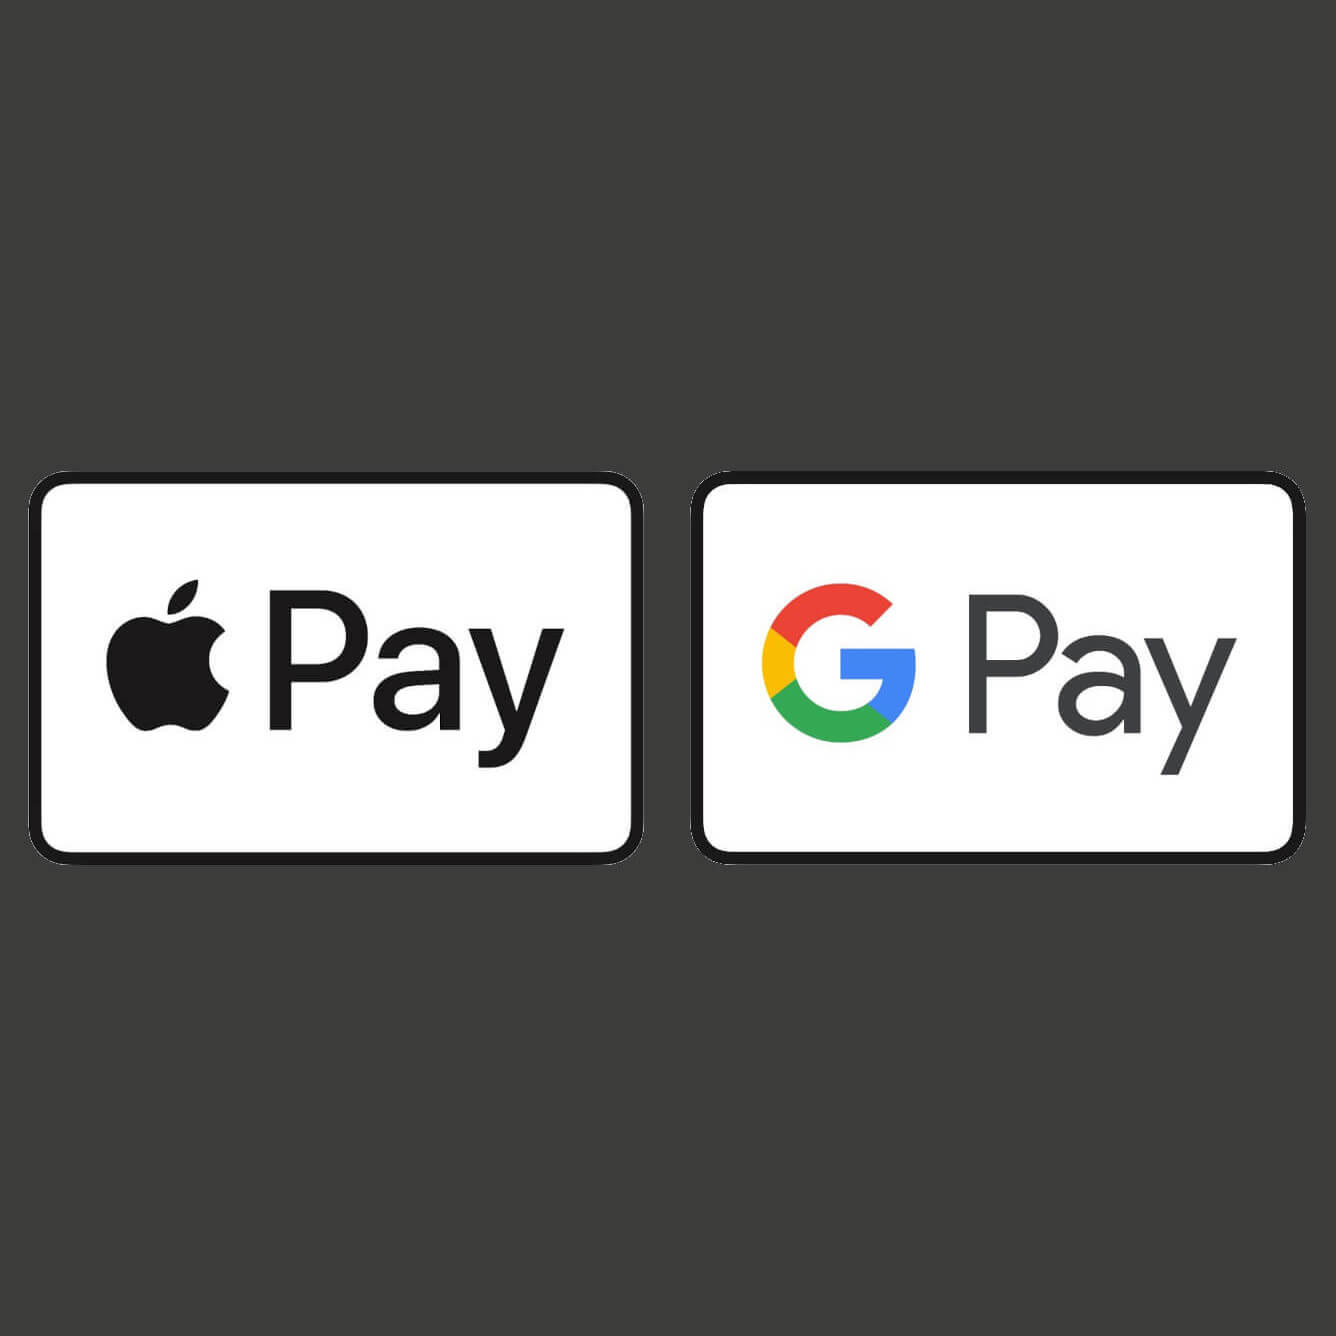 Apple Pay and Google Pay logos on a dark background.